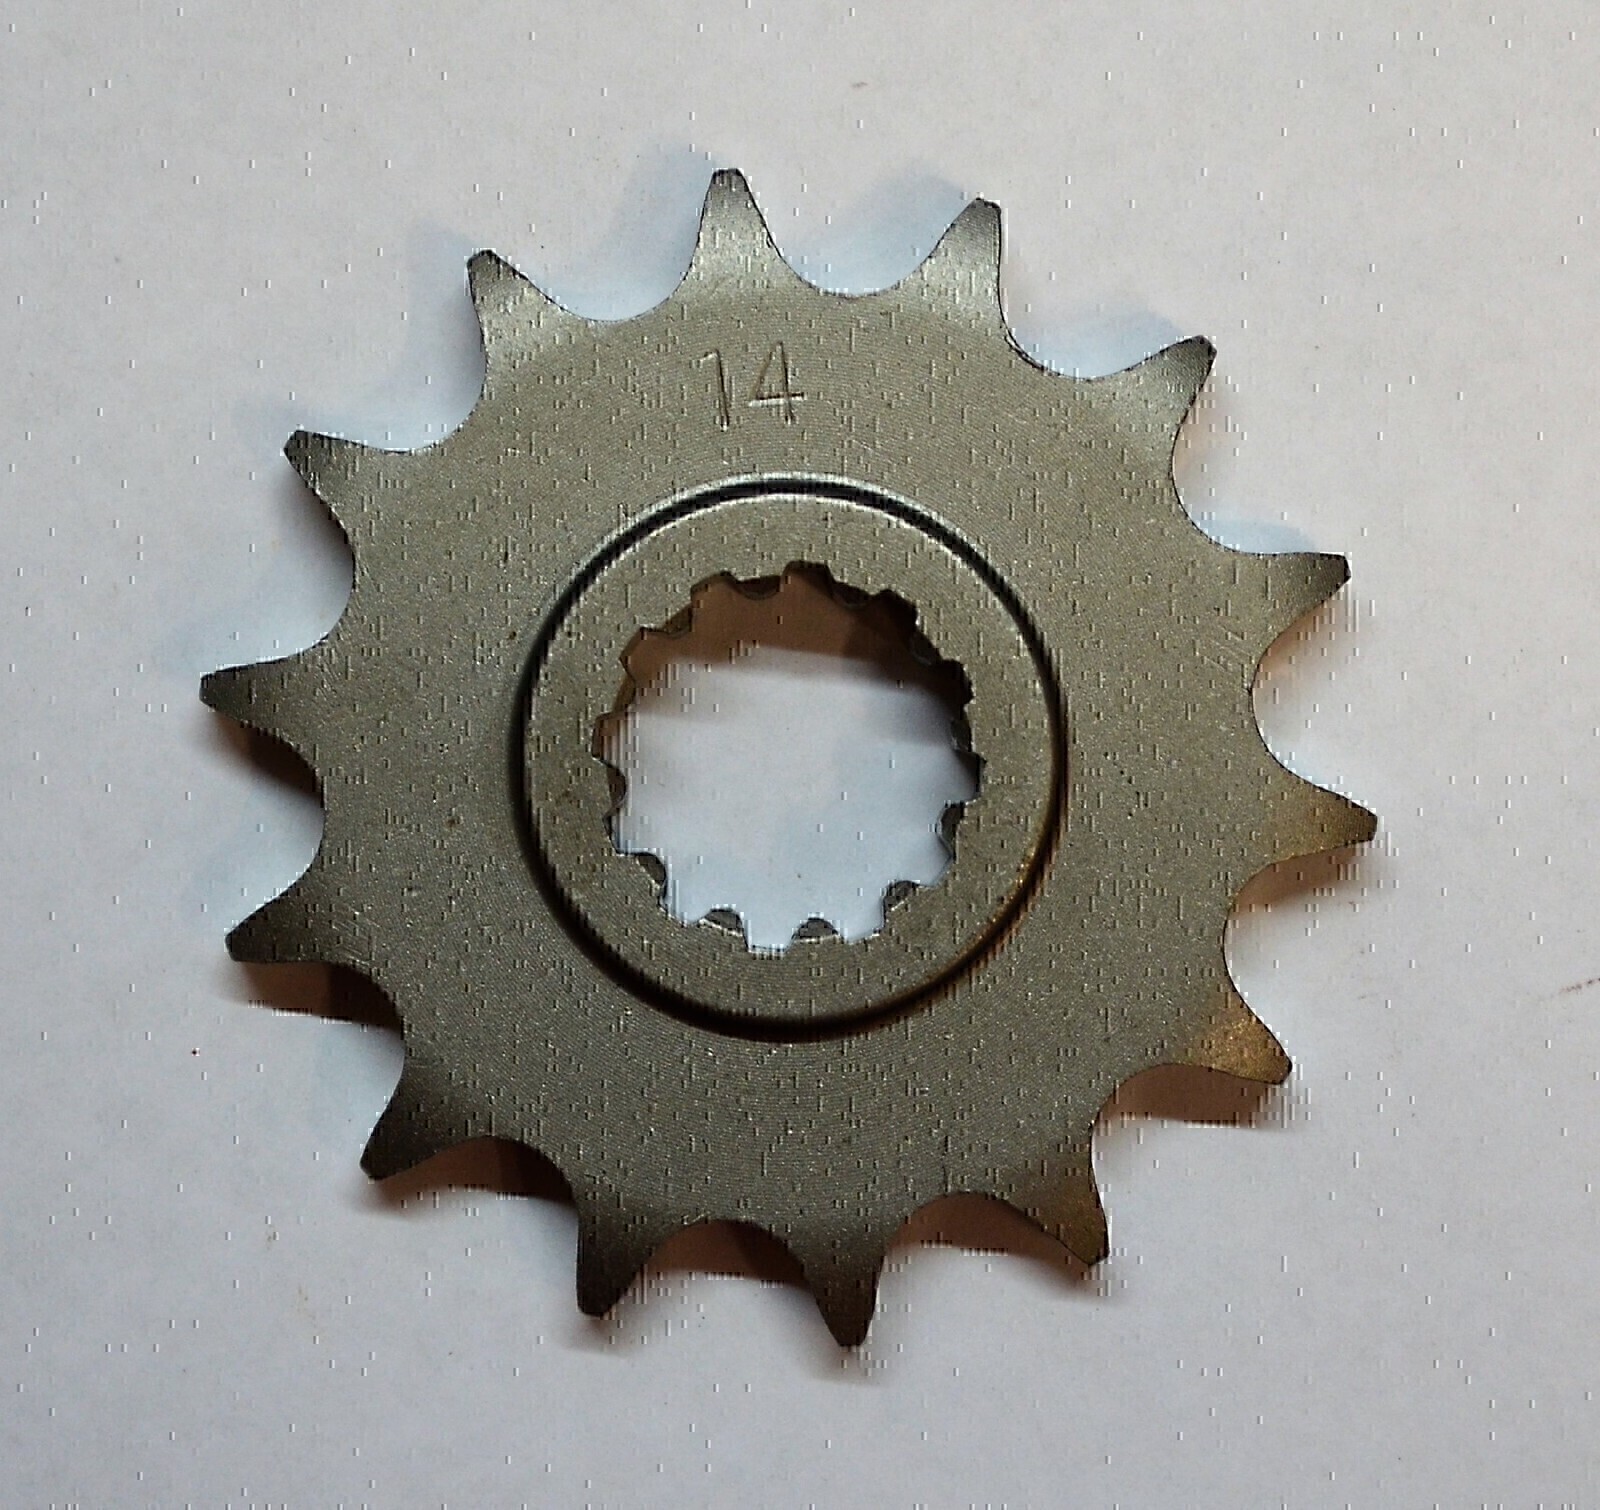 13 TOOTH FRONT SPROCKET FOR KAWASAKI 12T KX125 1996 - 2007